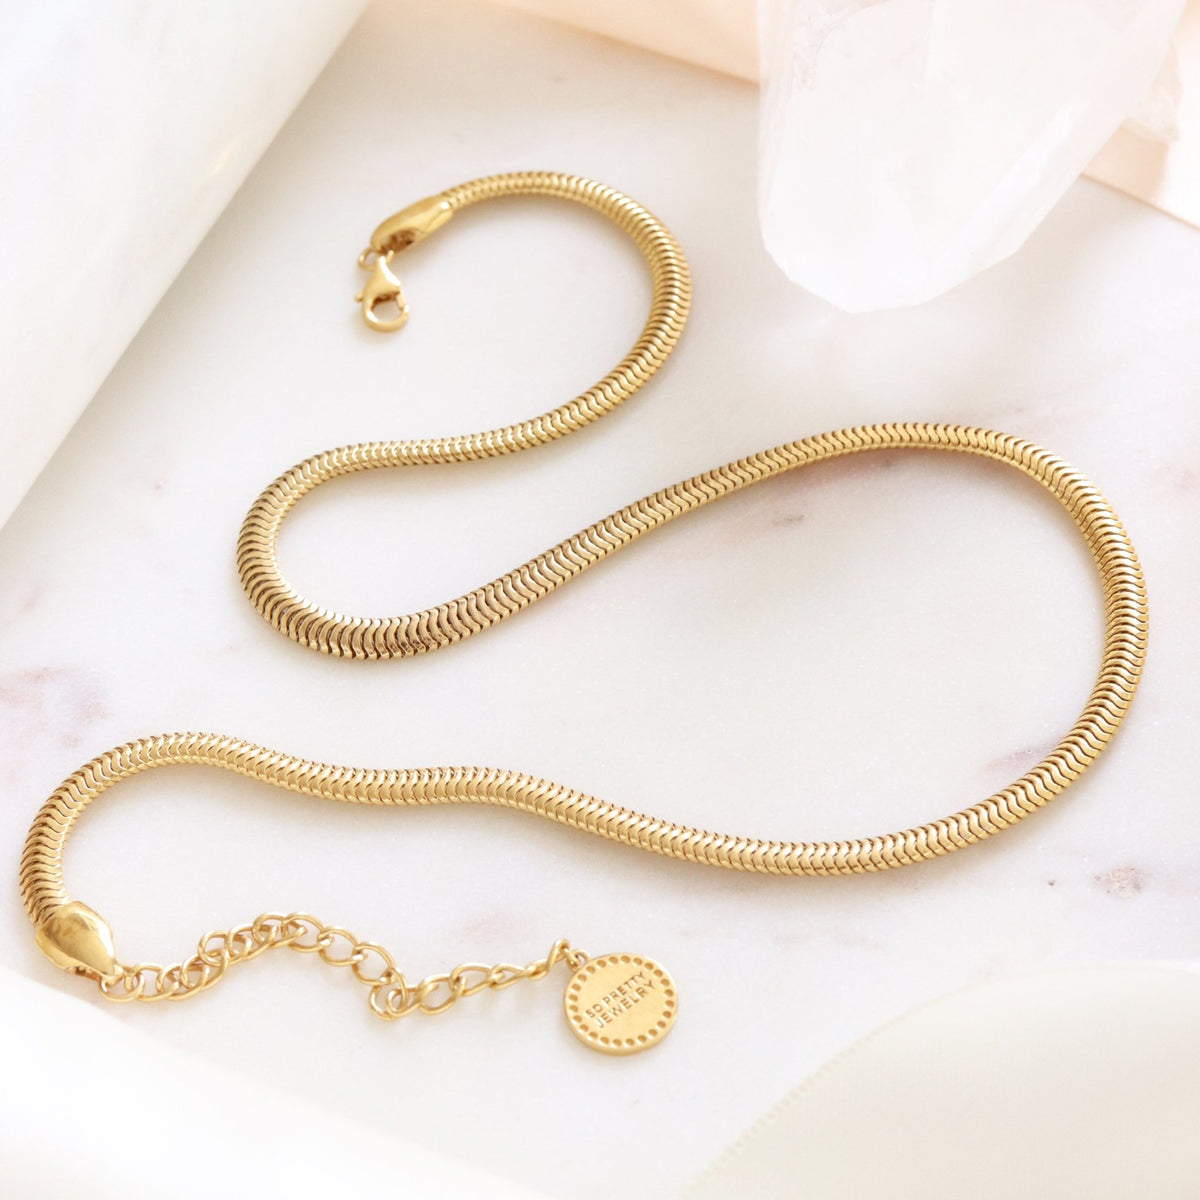 FEARLESS COBRA NECKLACE - GOLD - SO PRETTY CARA COTTER